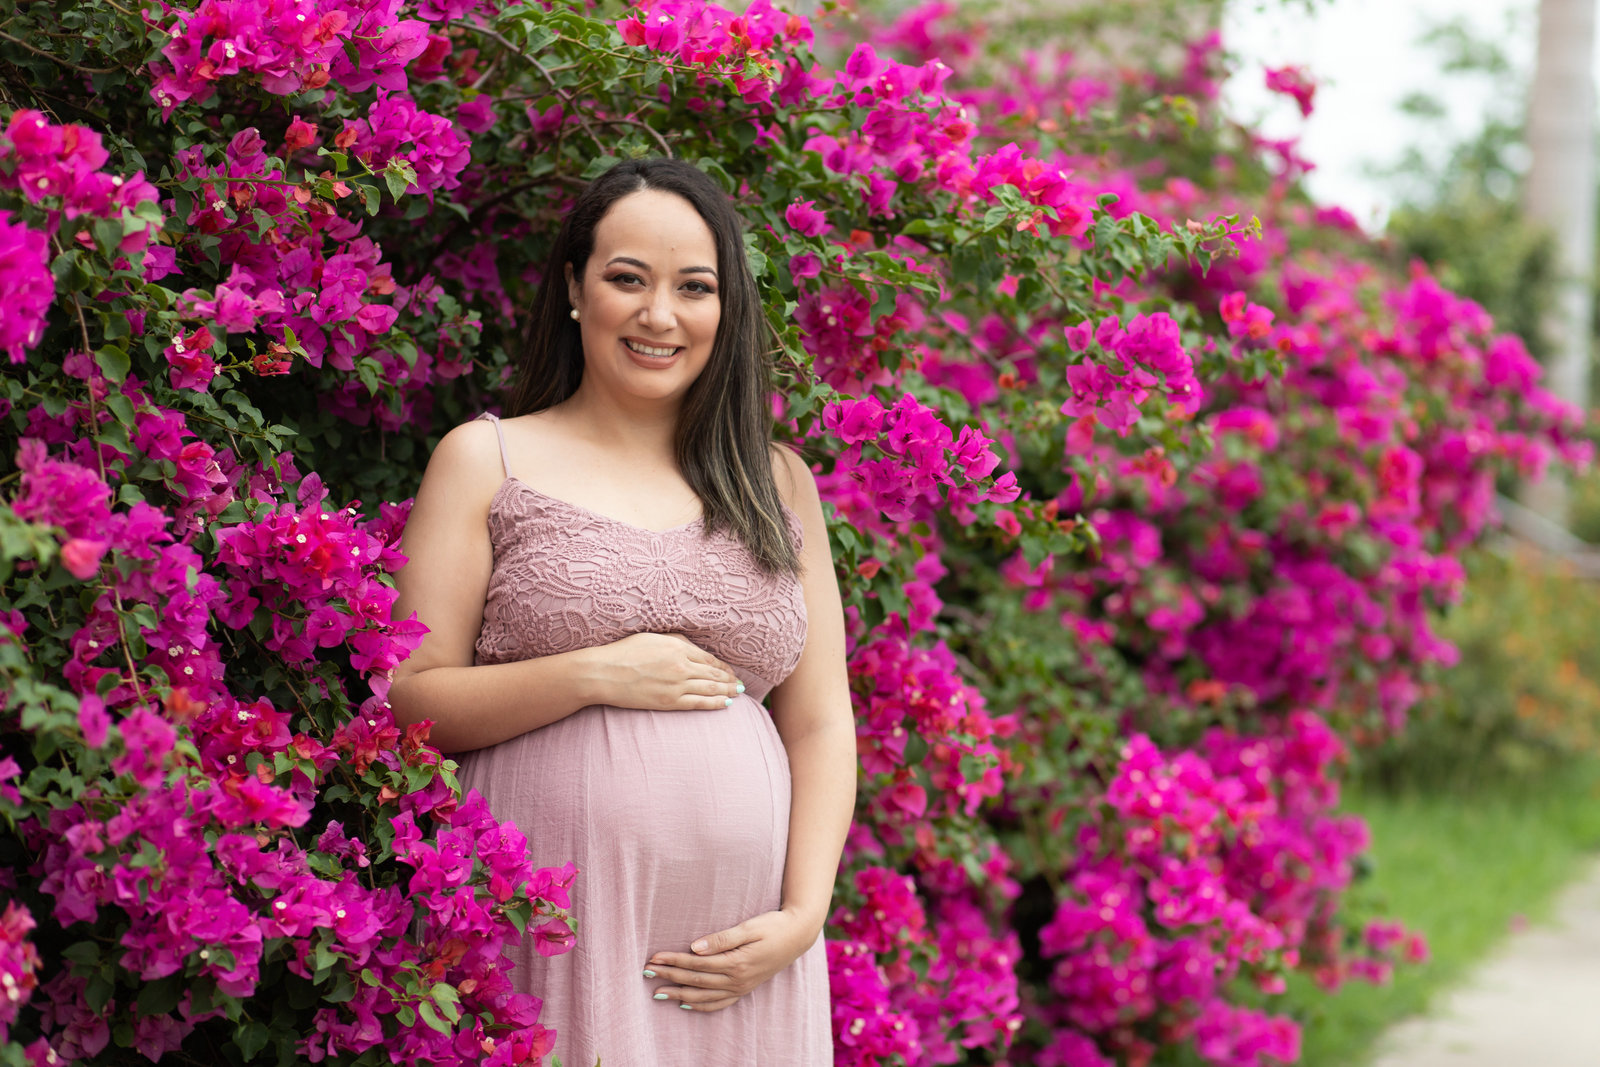 Maternity Session with Flowers